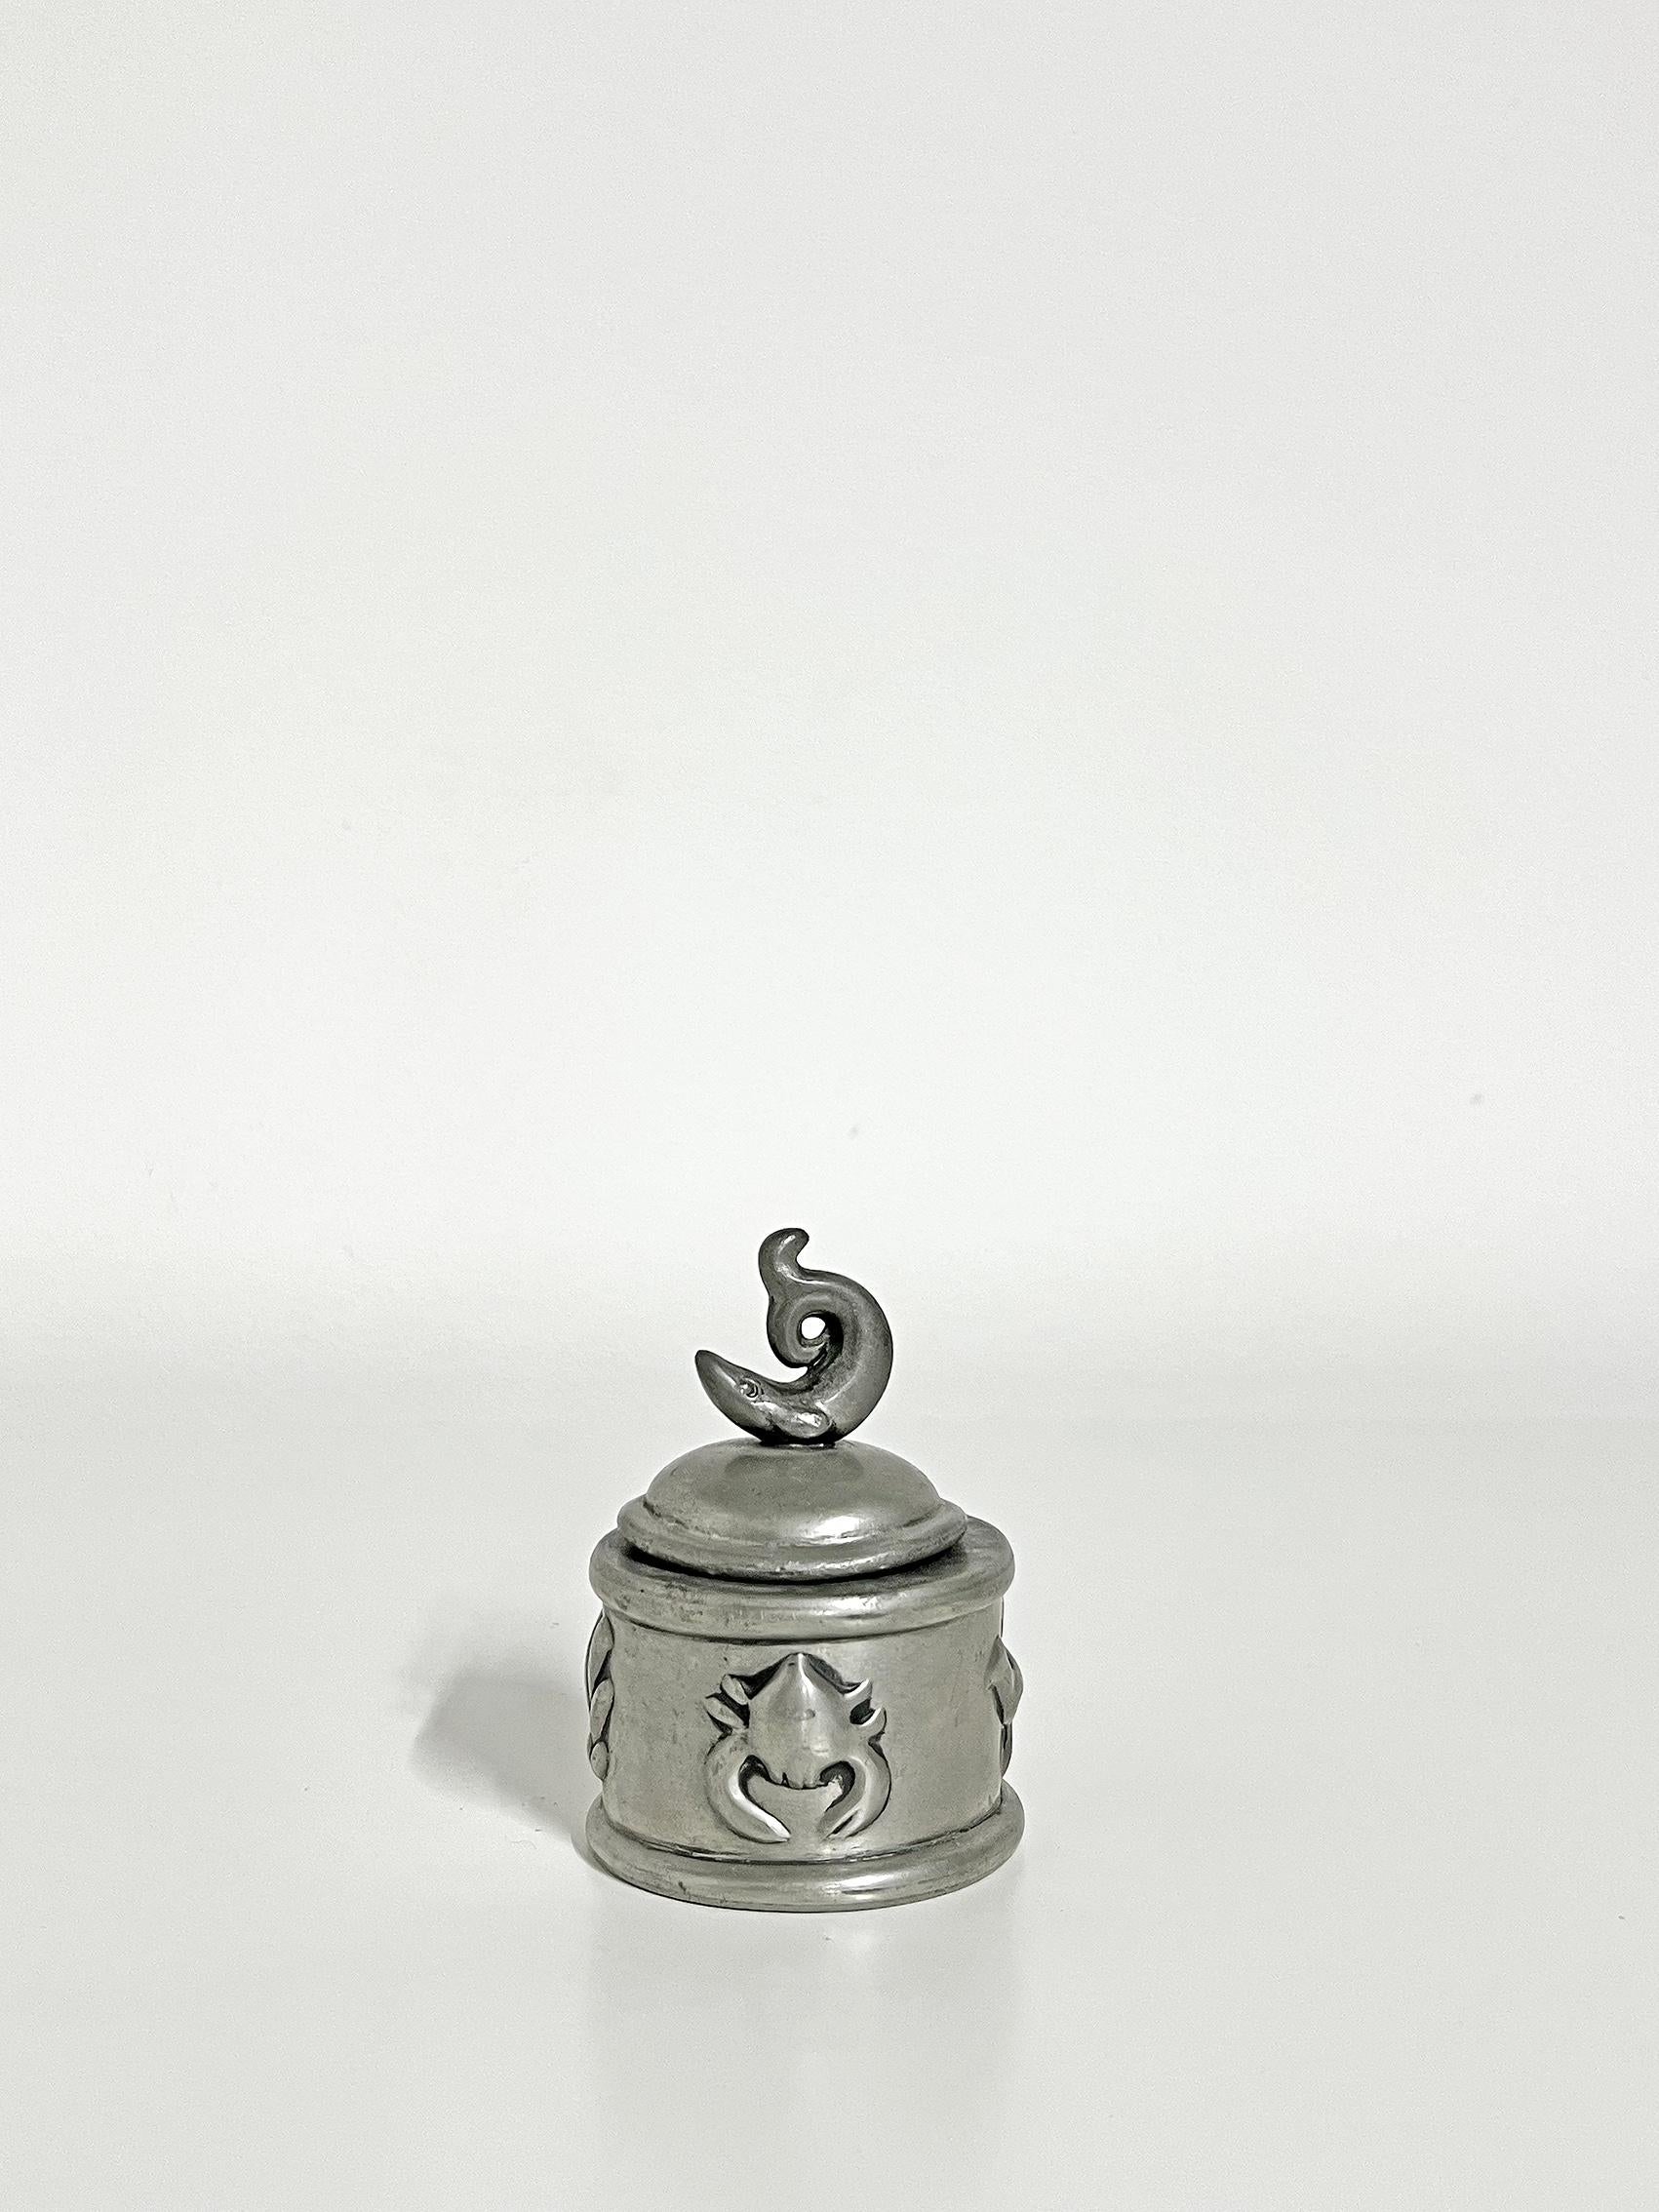 Rare pewter inkstand, Firma Svenskt Tenn, Sweden -1925.
Lid in the shape of a fish, relief decoration along the sides.
The insert in glass is missing. 
Wear and patina consistent with age and use. The lid is slightly misshaped, as seen on the first